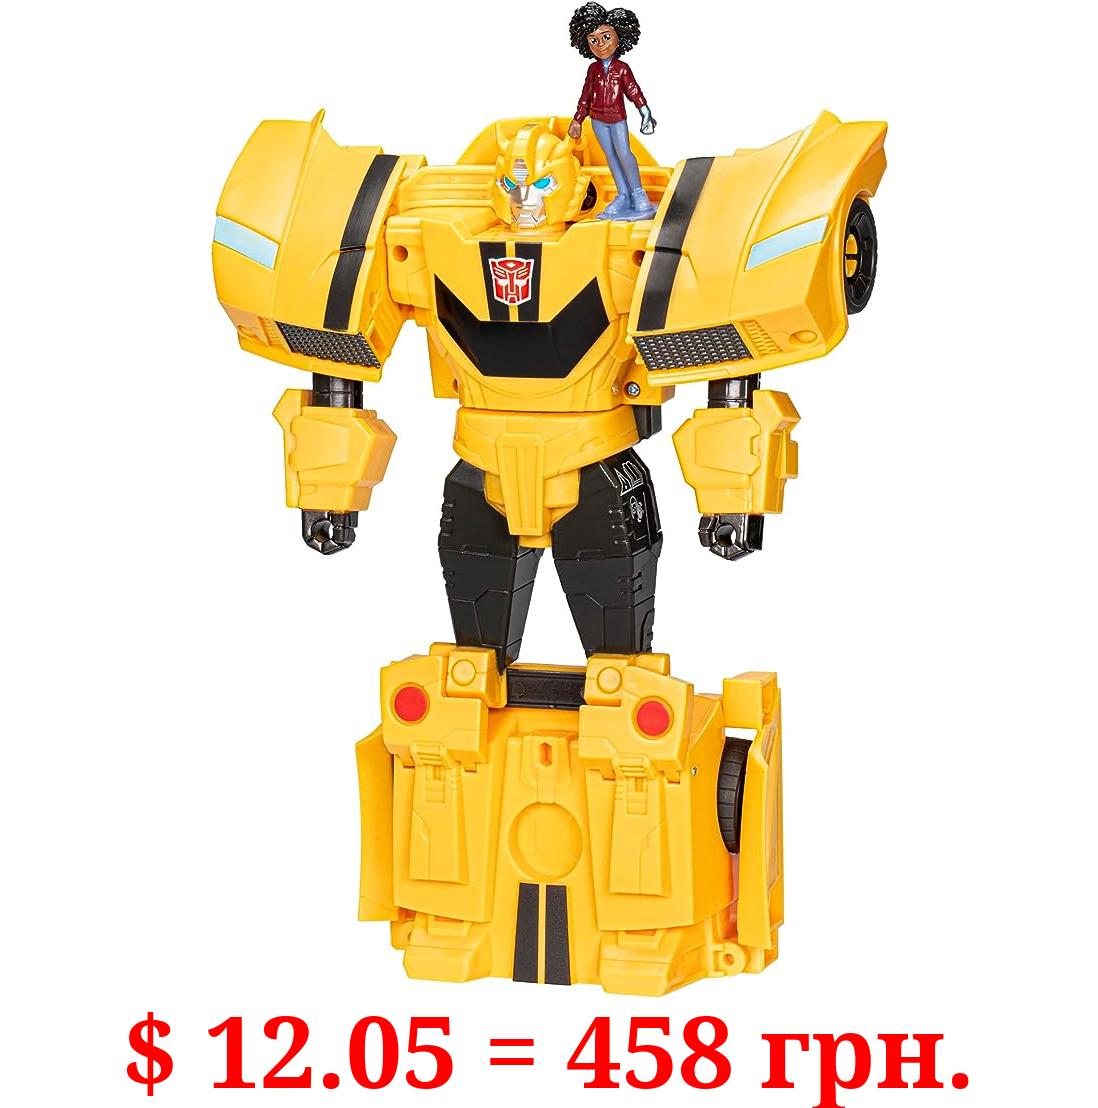 Transformers Toys EarthSpark Spin Changer Bumblebee 8-Inch Action Figure with Mo Malto 2-Inch Figure, Robot Toys for Ages 6 and Up